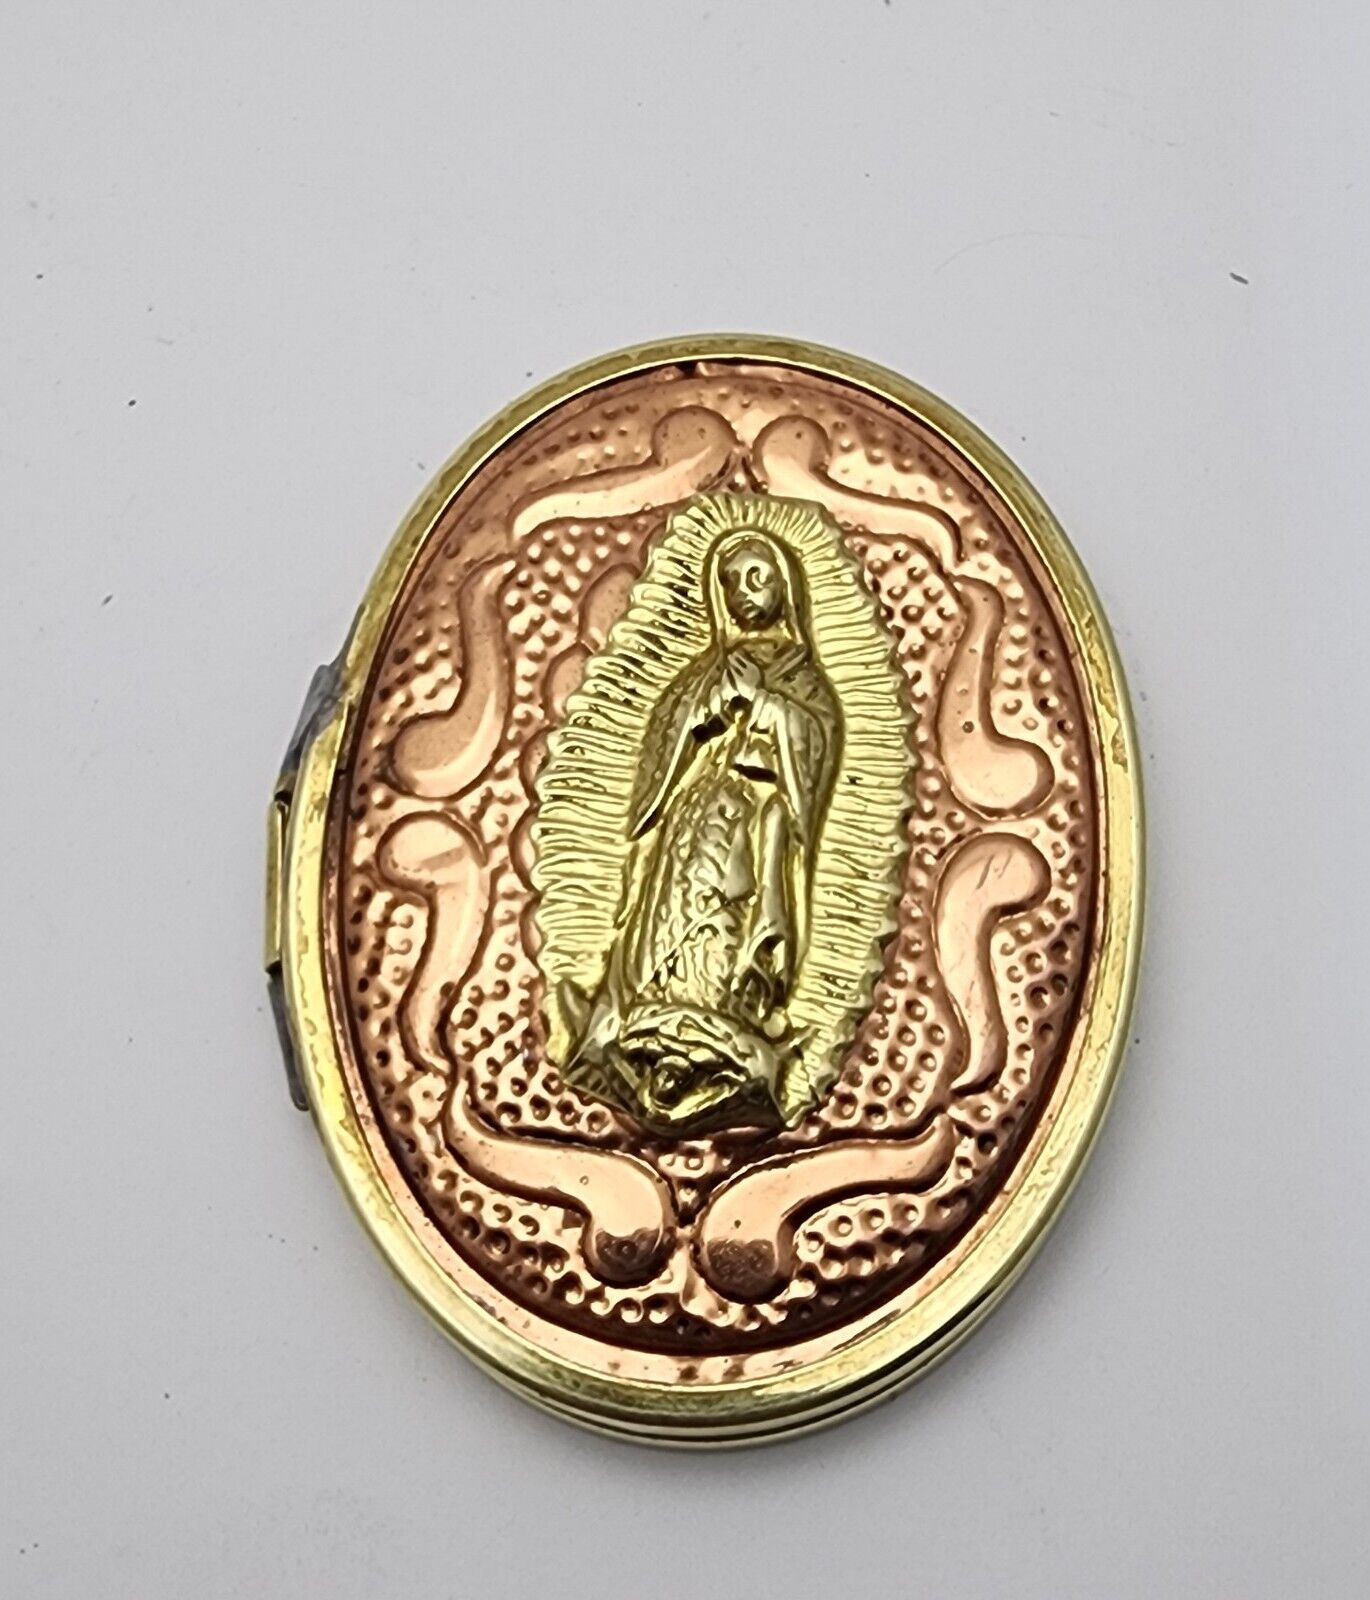 Antique or Vintage Bi Folding Compact Mirror Copper Brass Repousse Virgin Mary